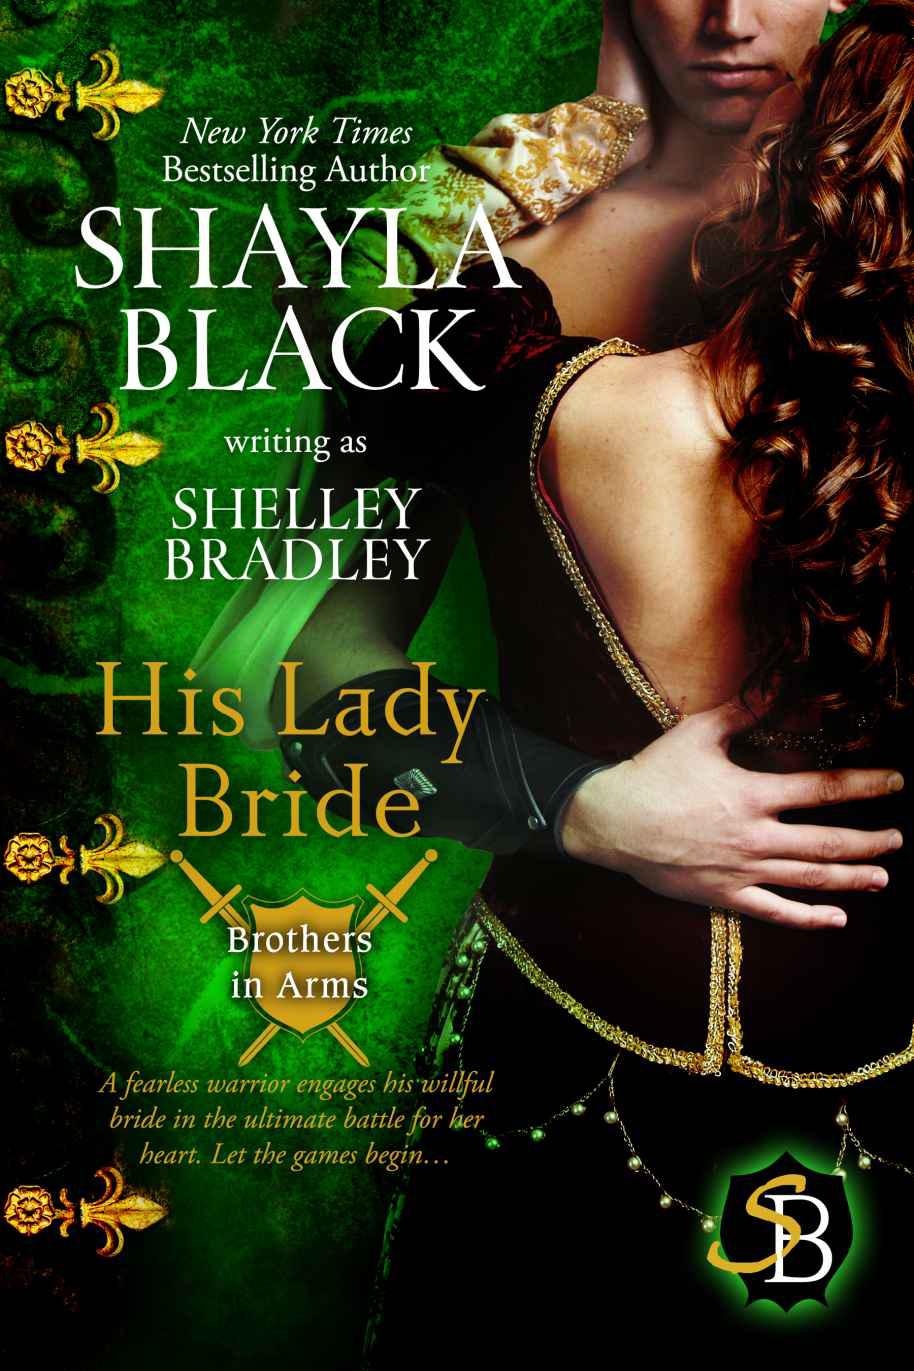 His Lady Bride (Brothers in Arms) by Shayla Black